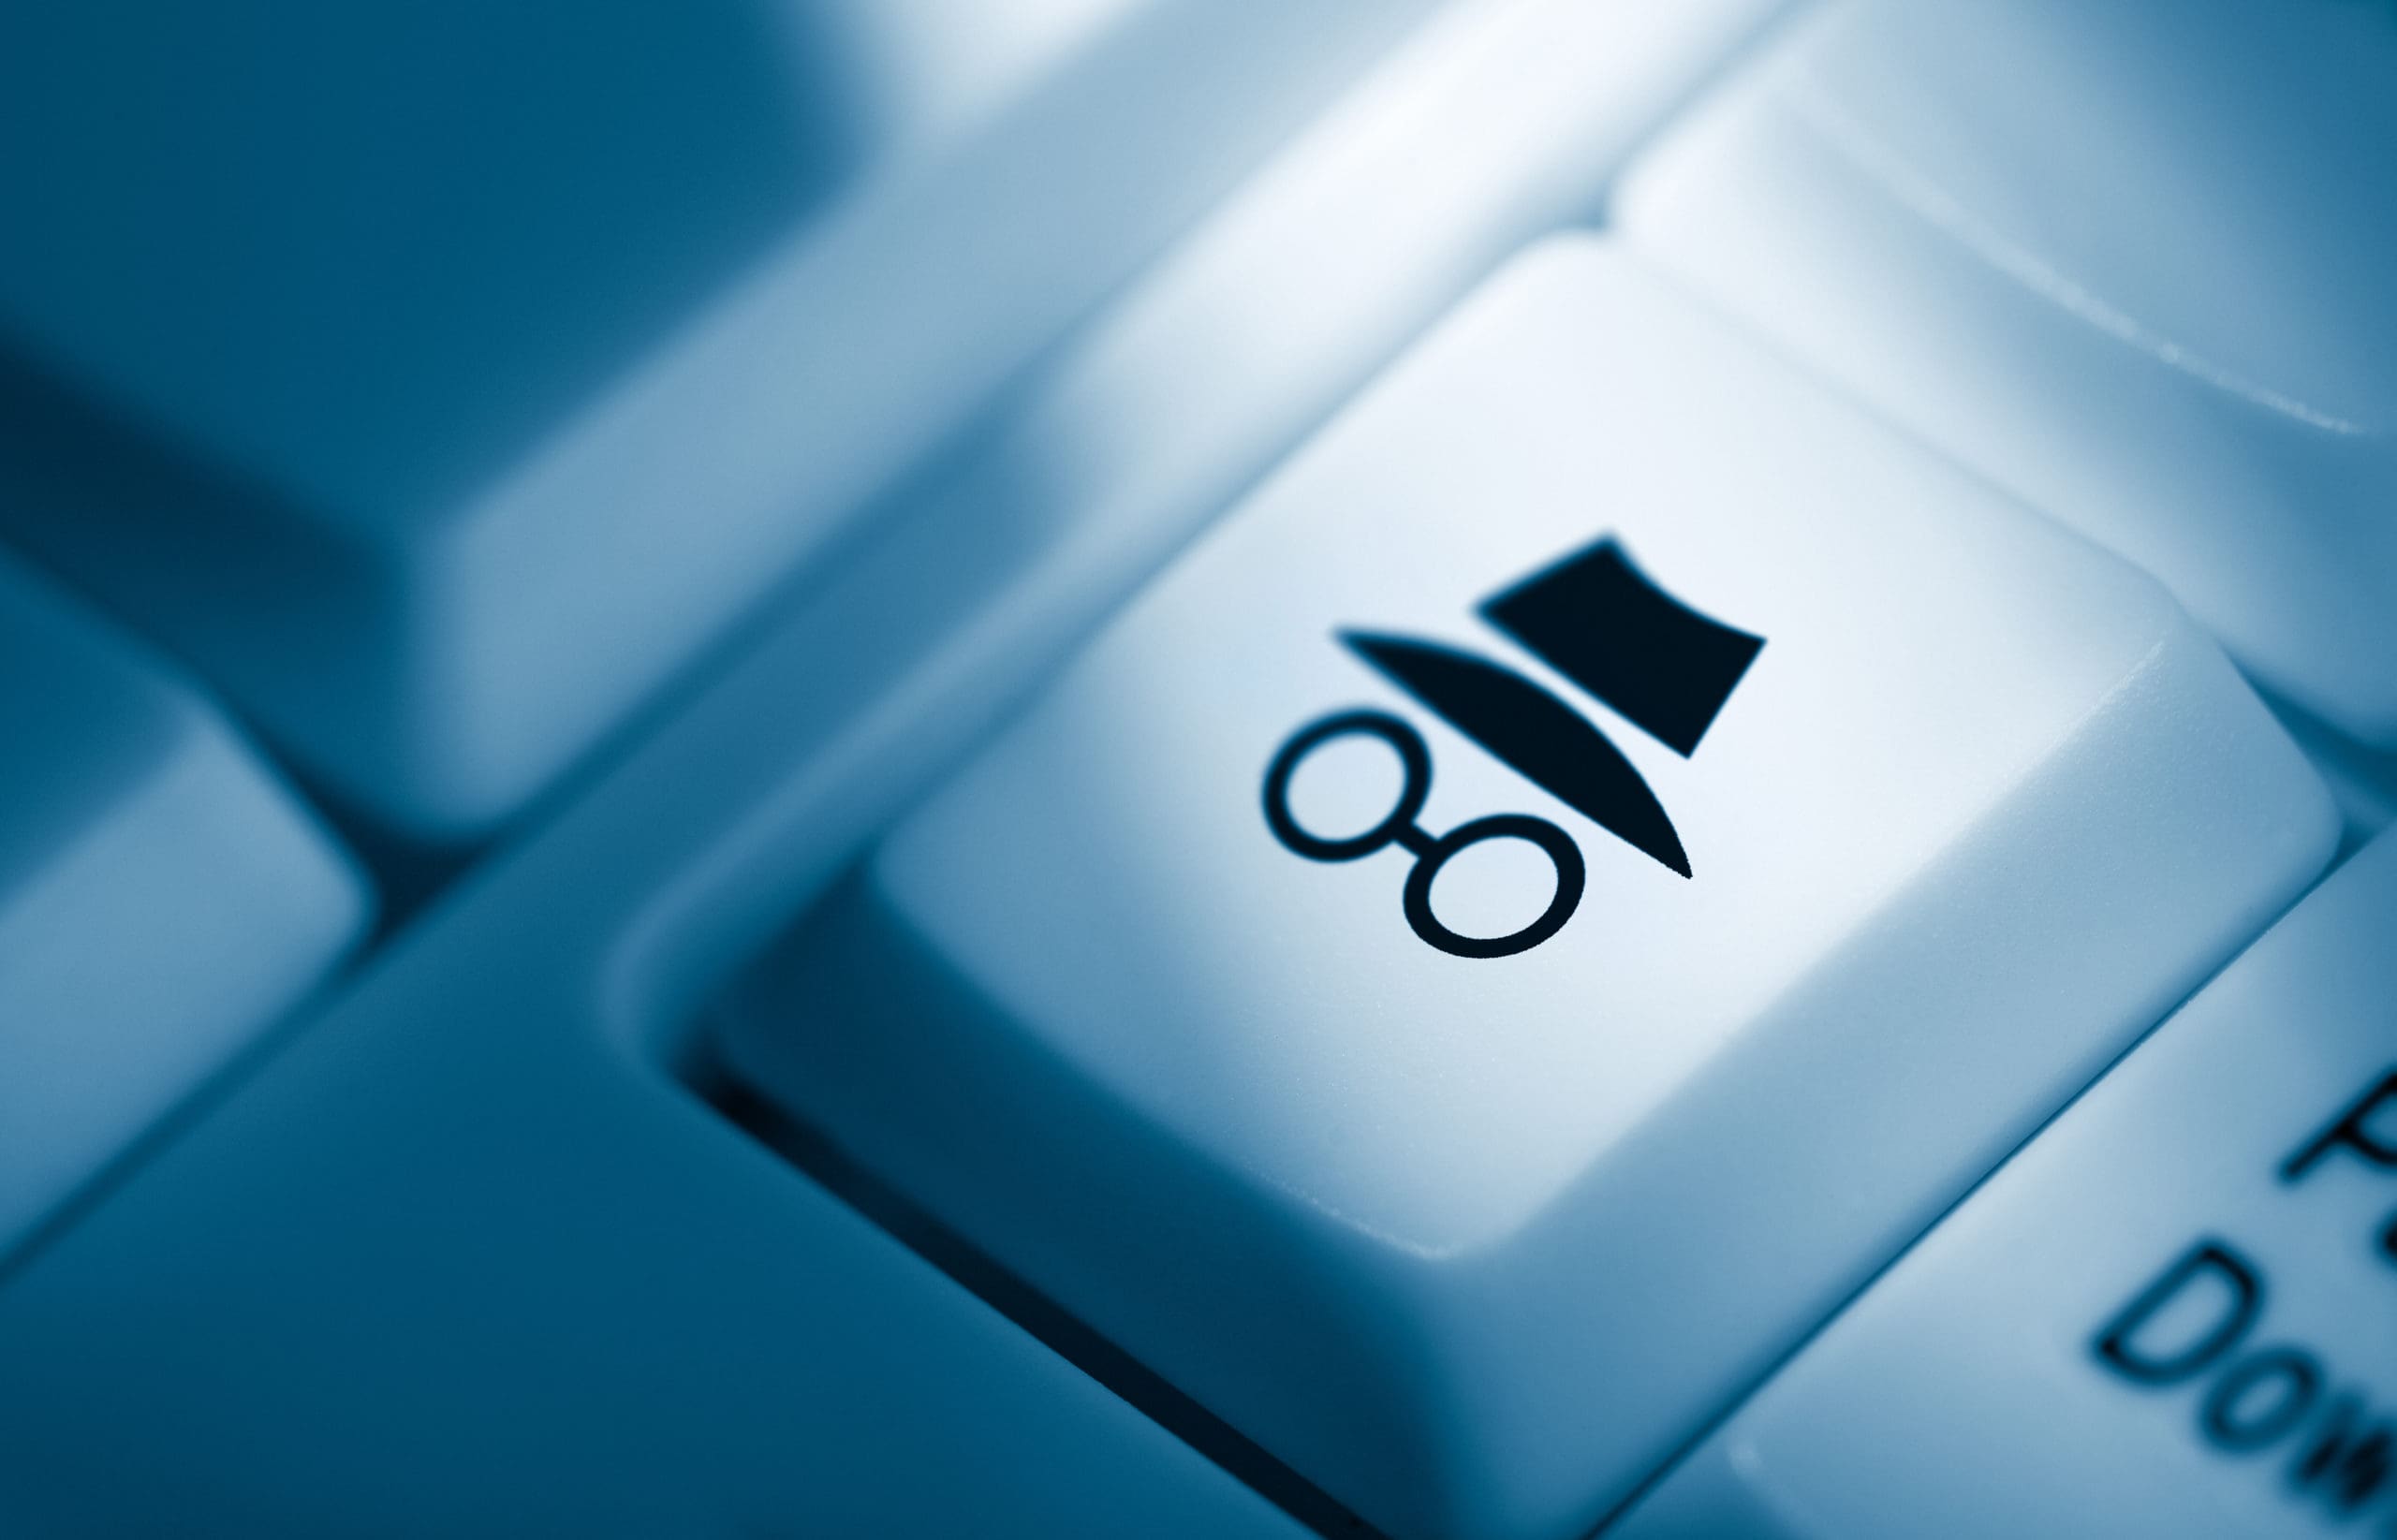 A close-up view of a keyboard key adorned with the symbol of a top hat and a pair of round spectacles, suggesting a quirky or specialized function, in a cool blue monochromatic light.